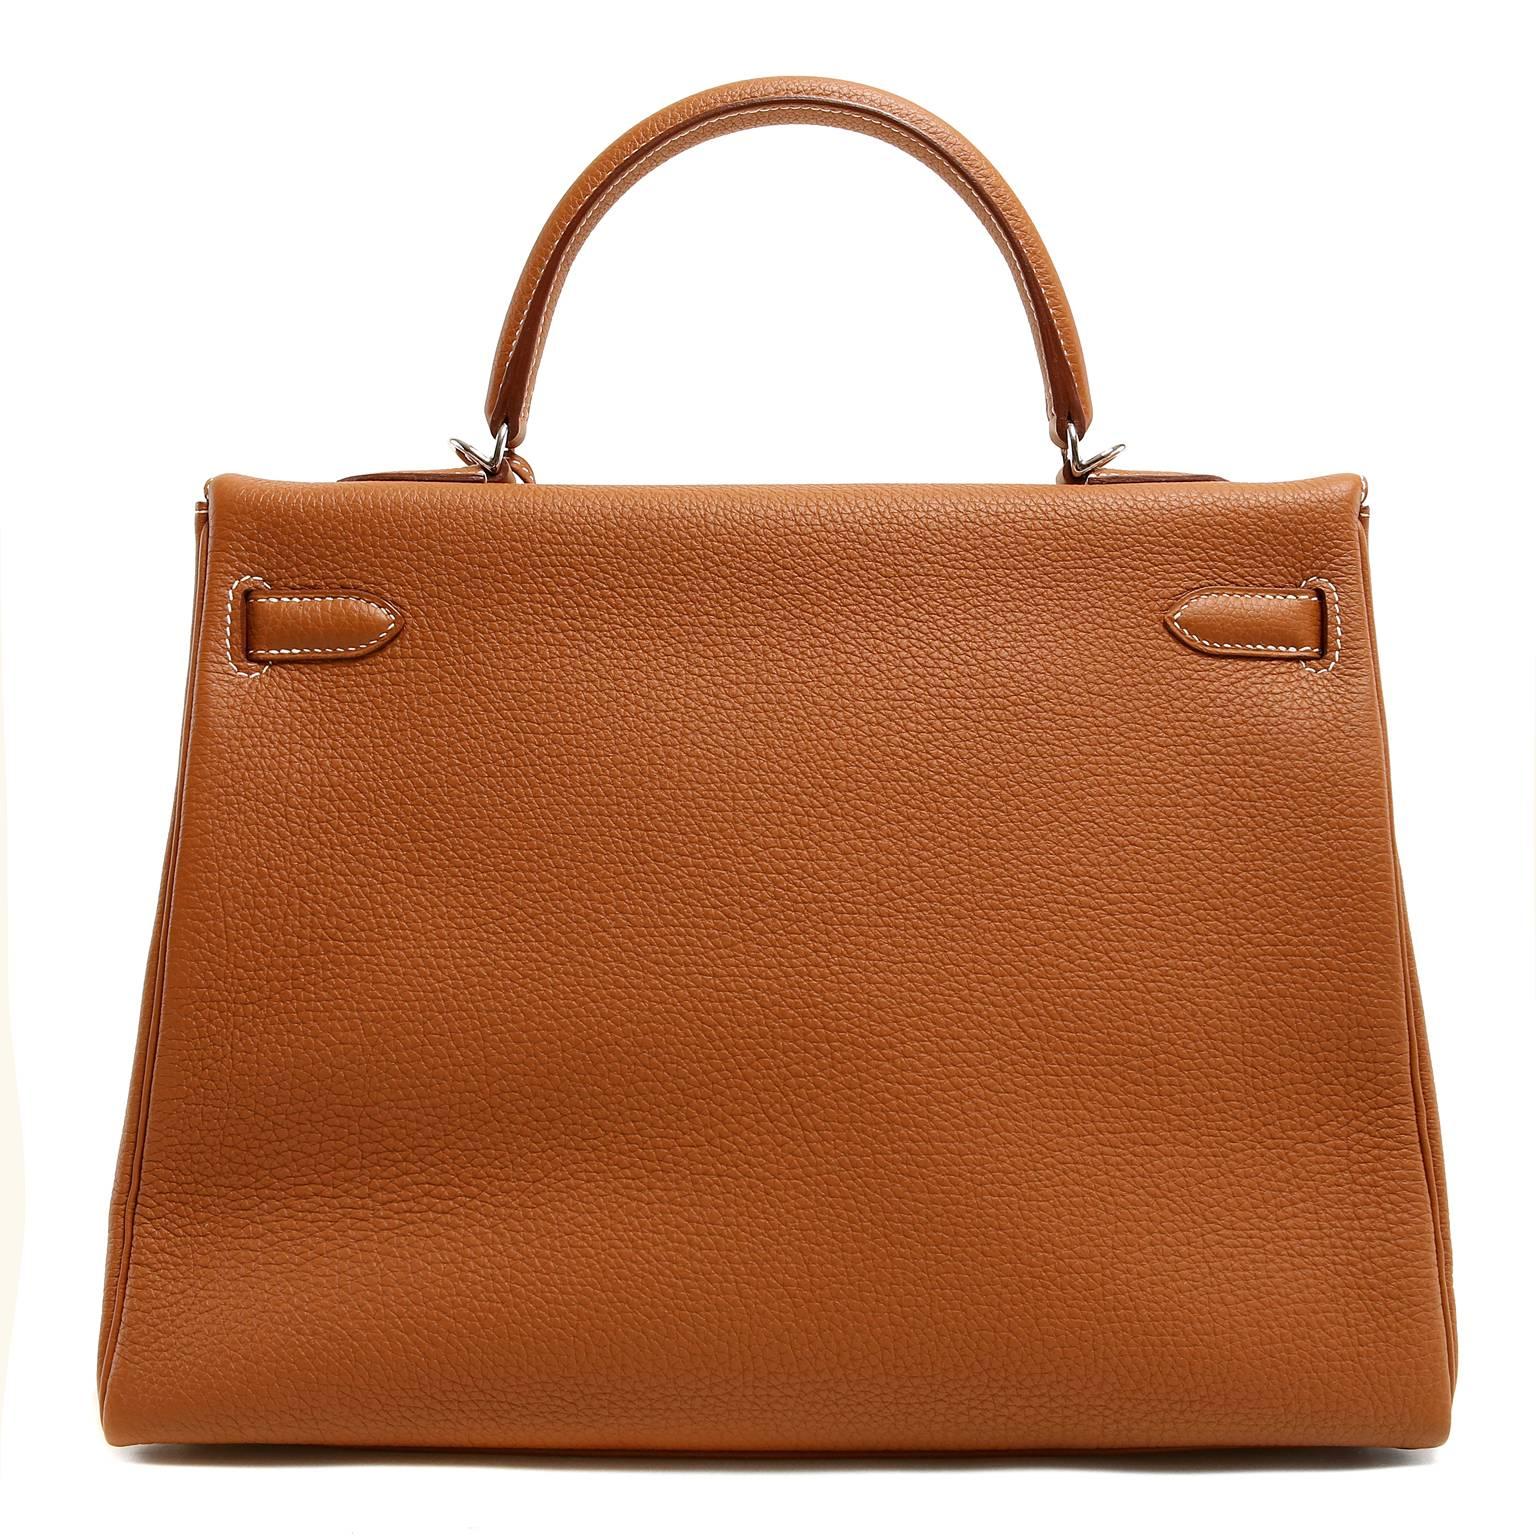 Hermès Gold Togo 35 cm Kelly- PRISTINE unworn condition.  The protective plastic remains intact on the hardware.   Hermès bags are considered the ultimate luxury item worldwide.  Each piece is handcrafted with waitlists that can exceed a year or